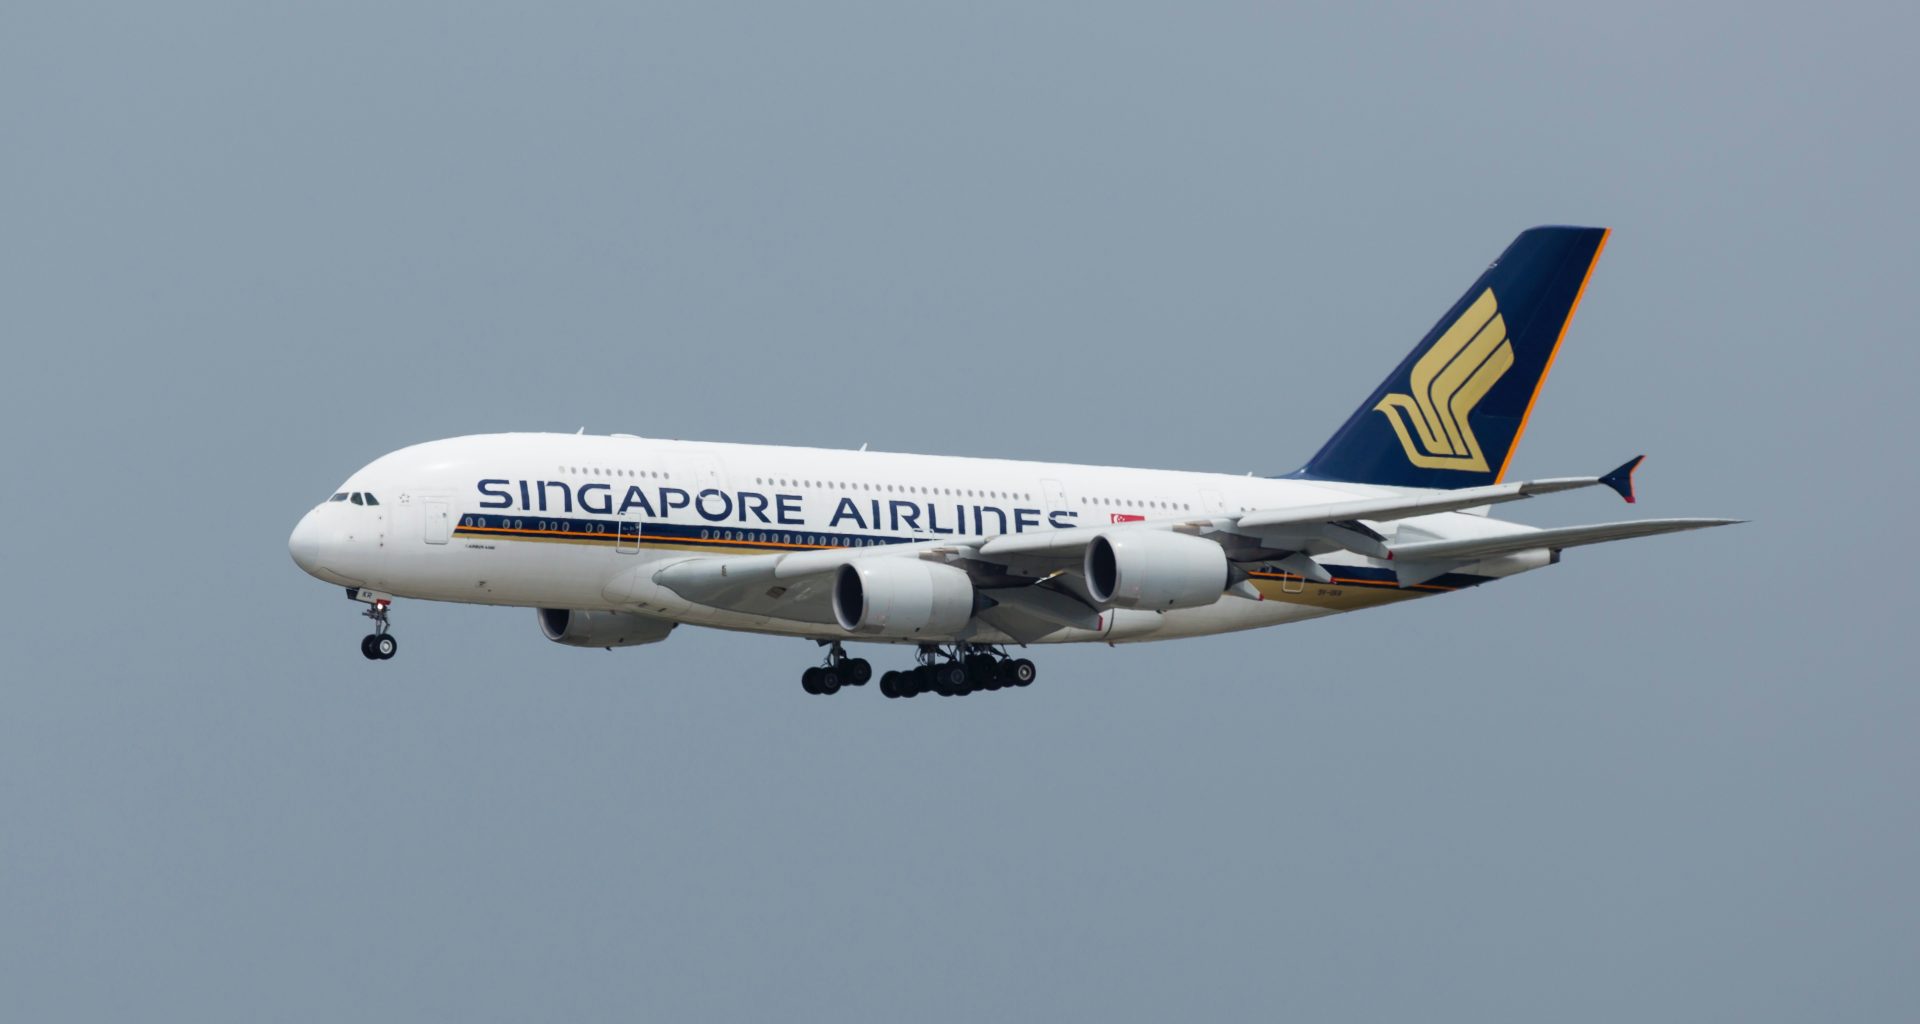 Singapore Airlines Continues To Make Profit In Its Second Quarter